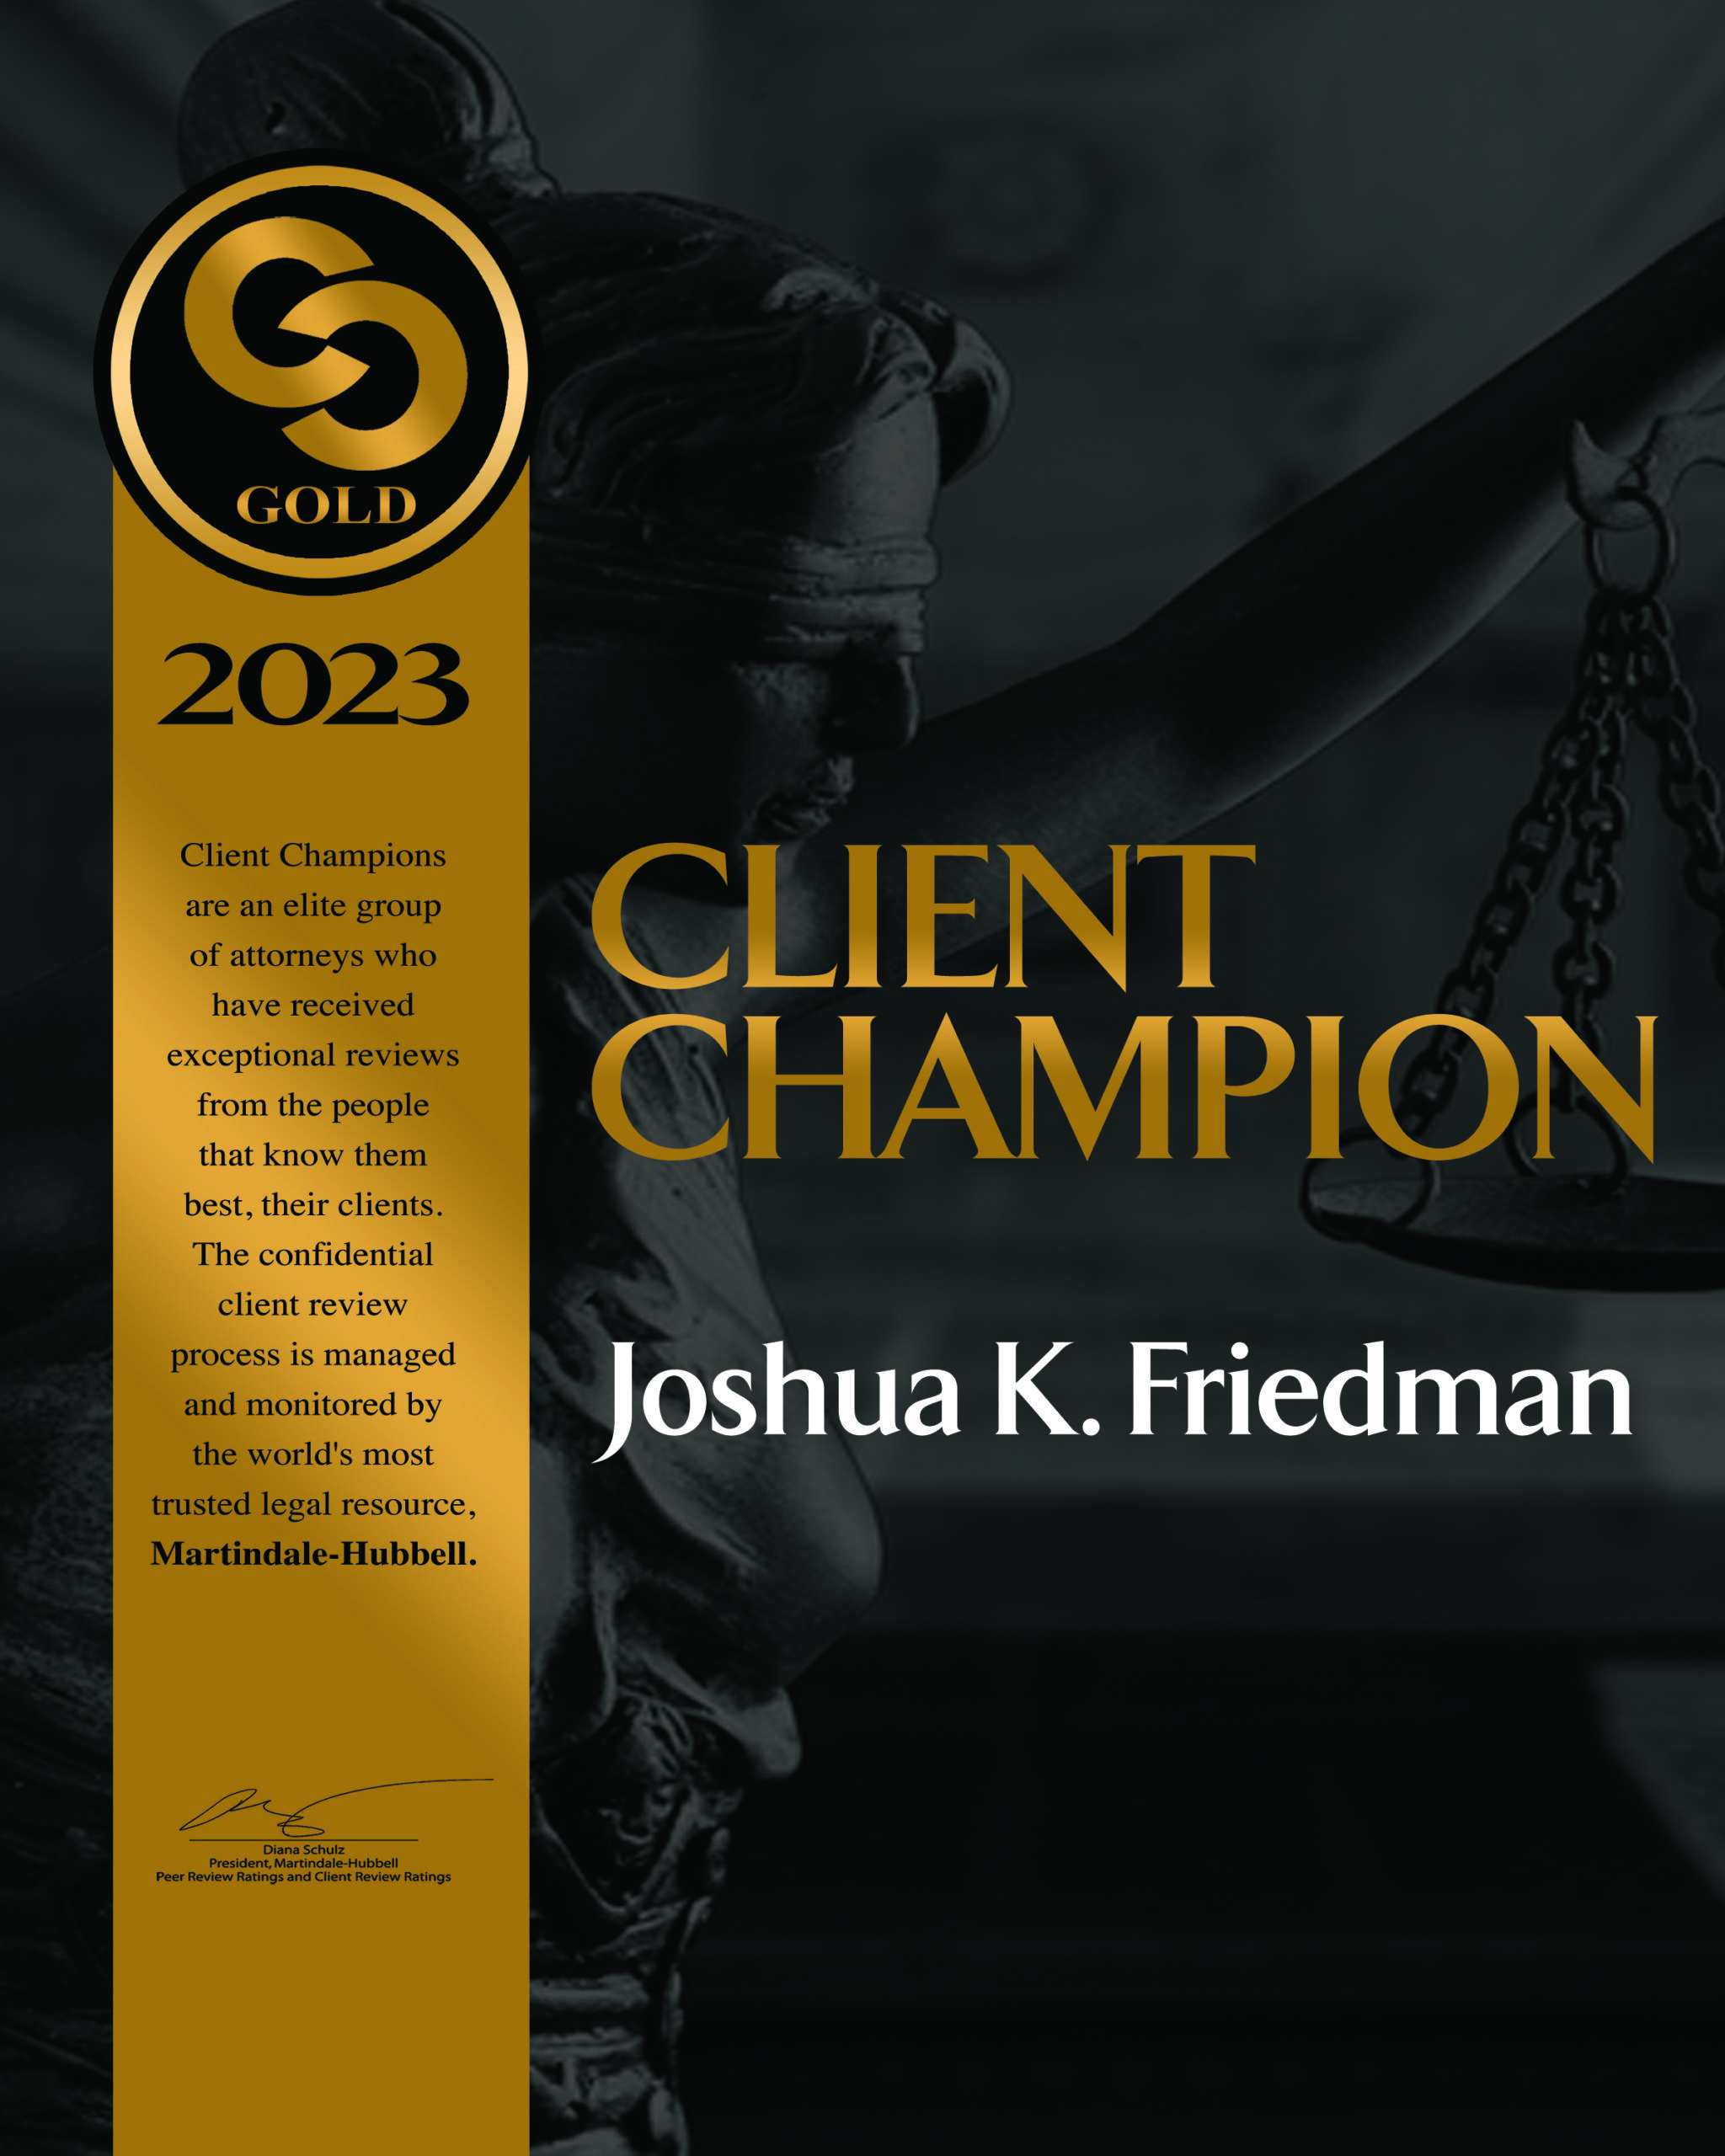 Board Certified Family Law Attorney Joshua Friedman Named a “Gold Client Champion” by Martindale-Hubbell